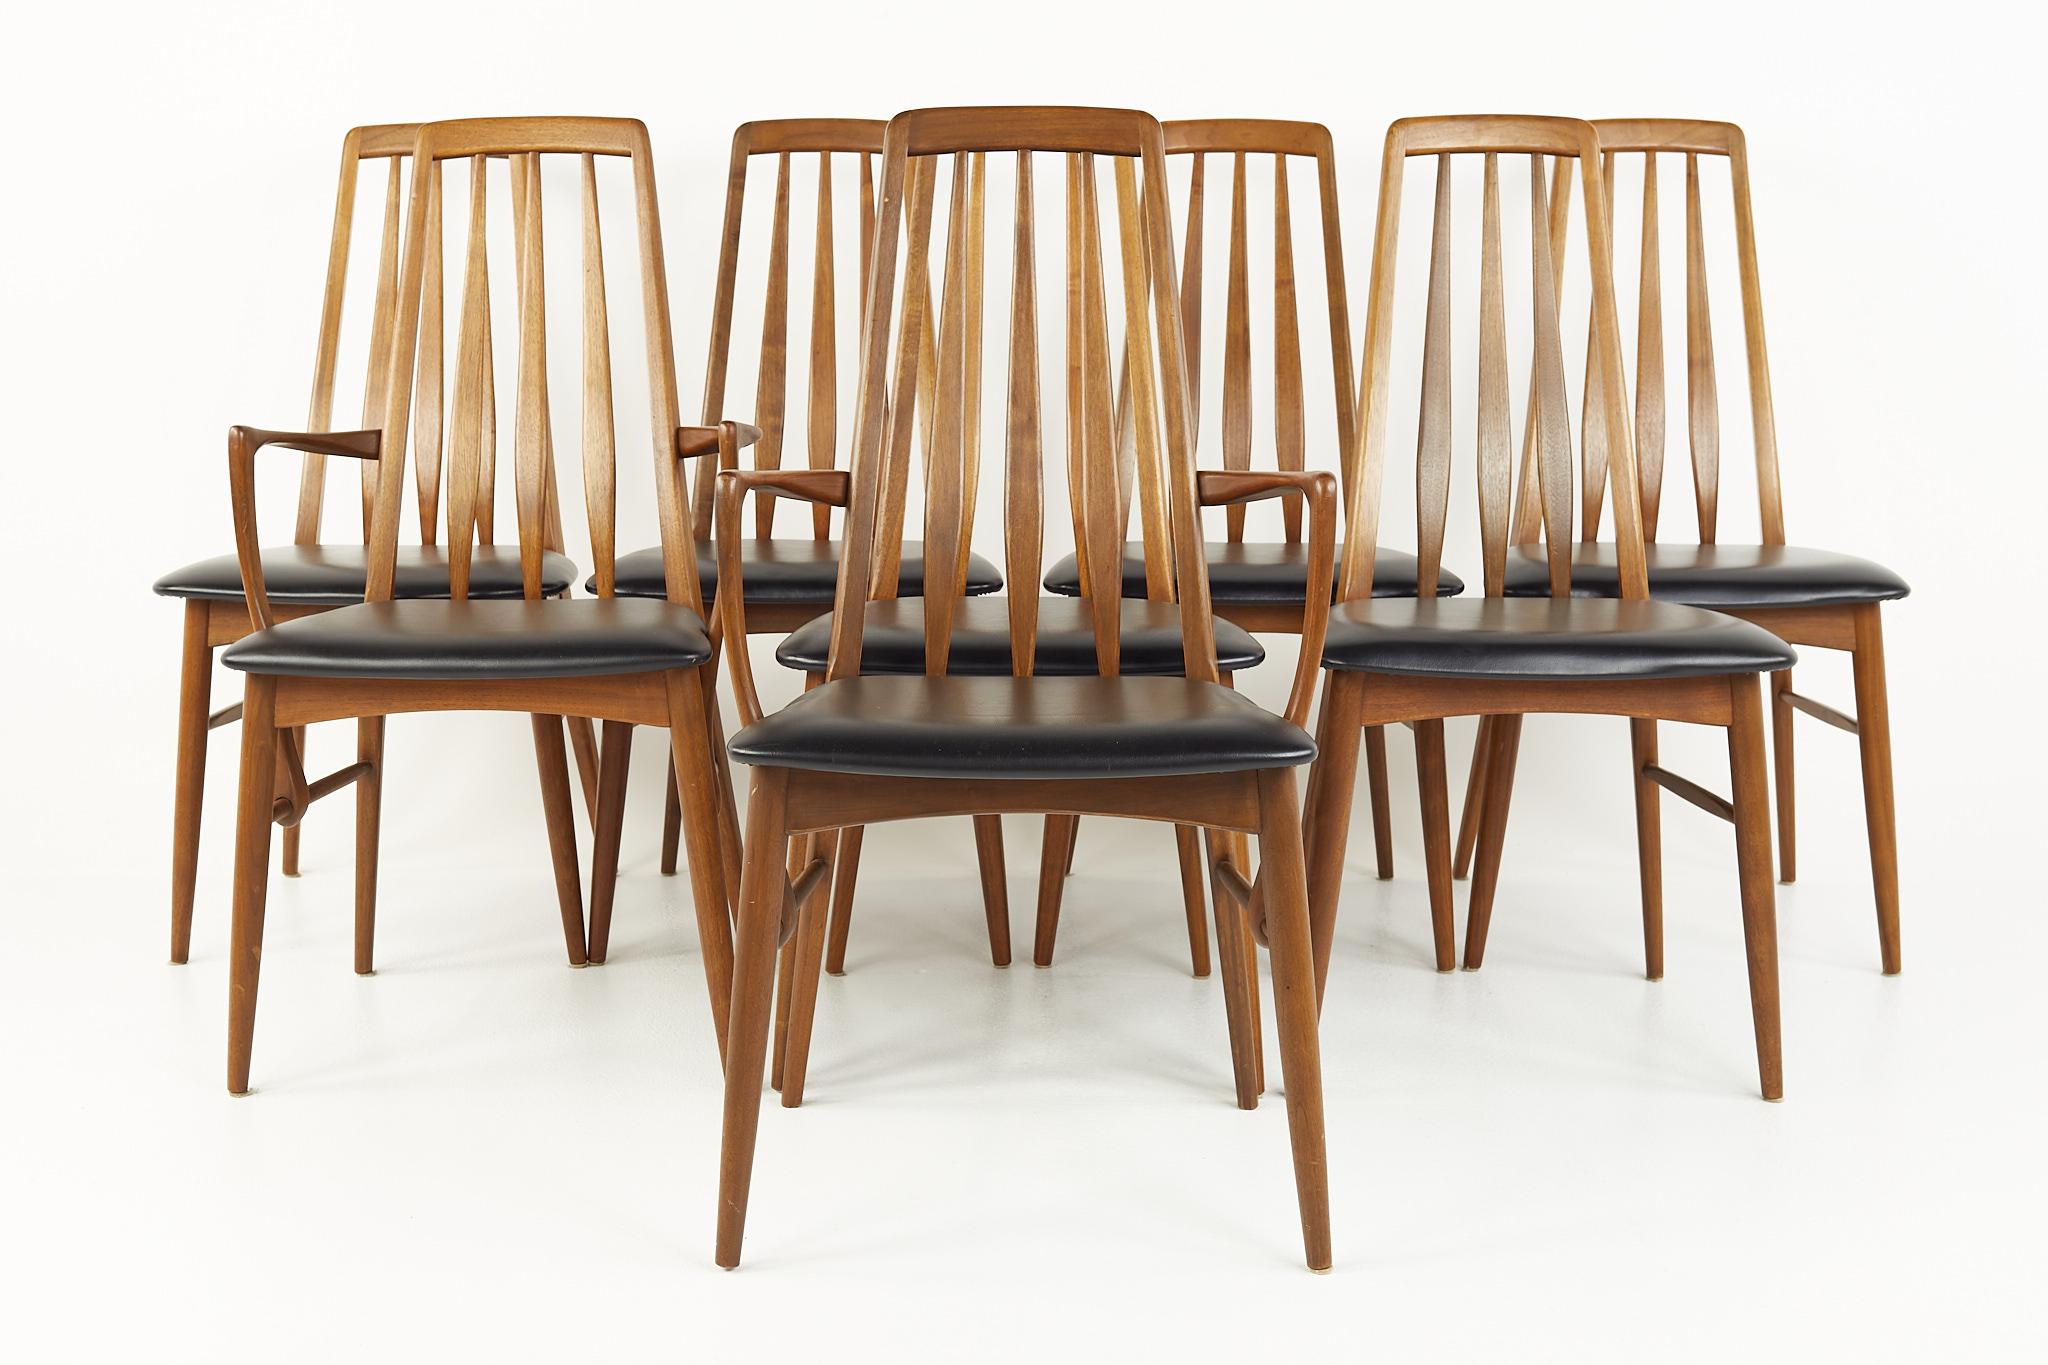 Niels Koefoed Eva mid century teak dining chairs - Set of 8 

Each chair measures: 18.5 wide x 19 deep x 38 high, with a seat height of 18.5 inches and an arm height of 25.5 inches

All pieces of furniture can be had in what we call restored